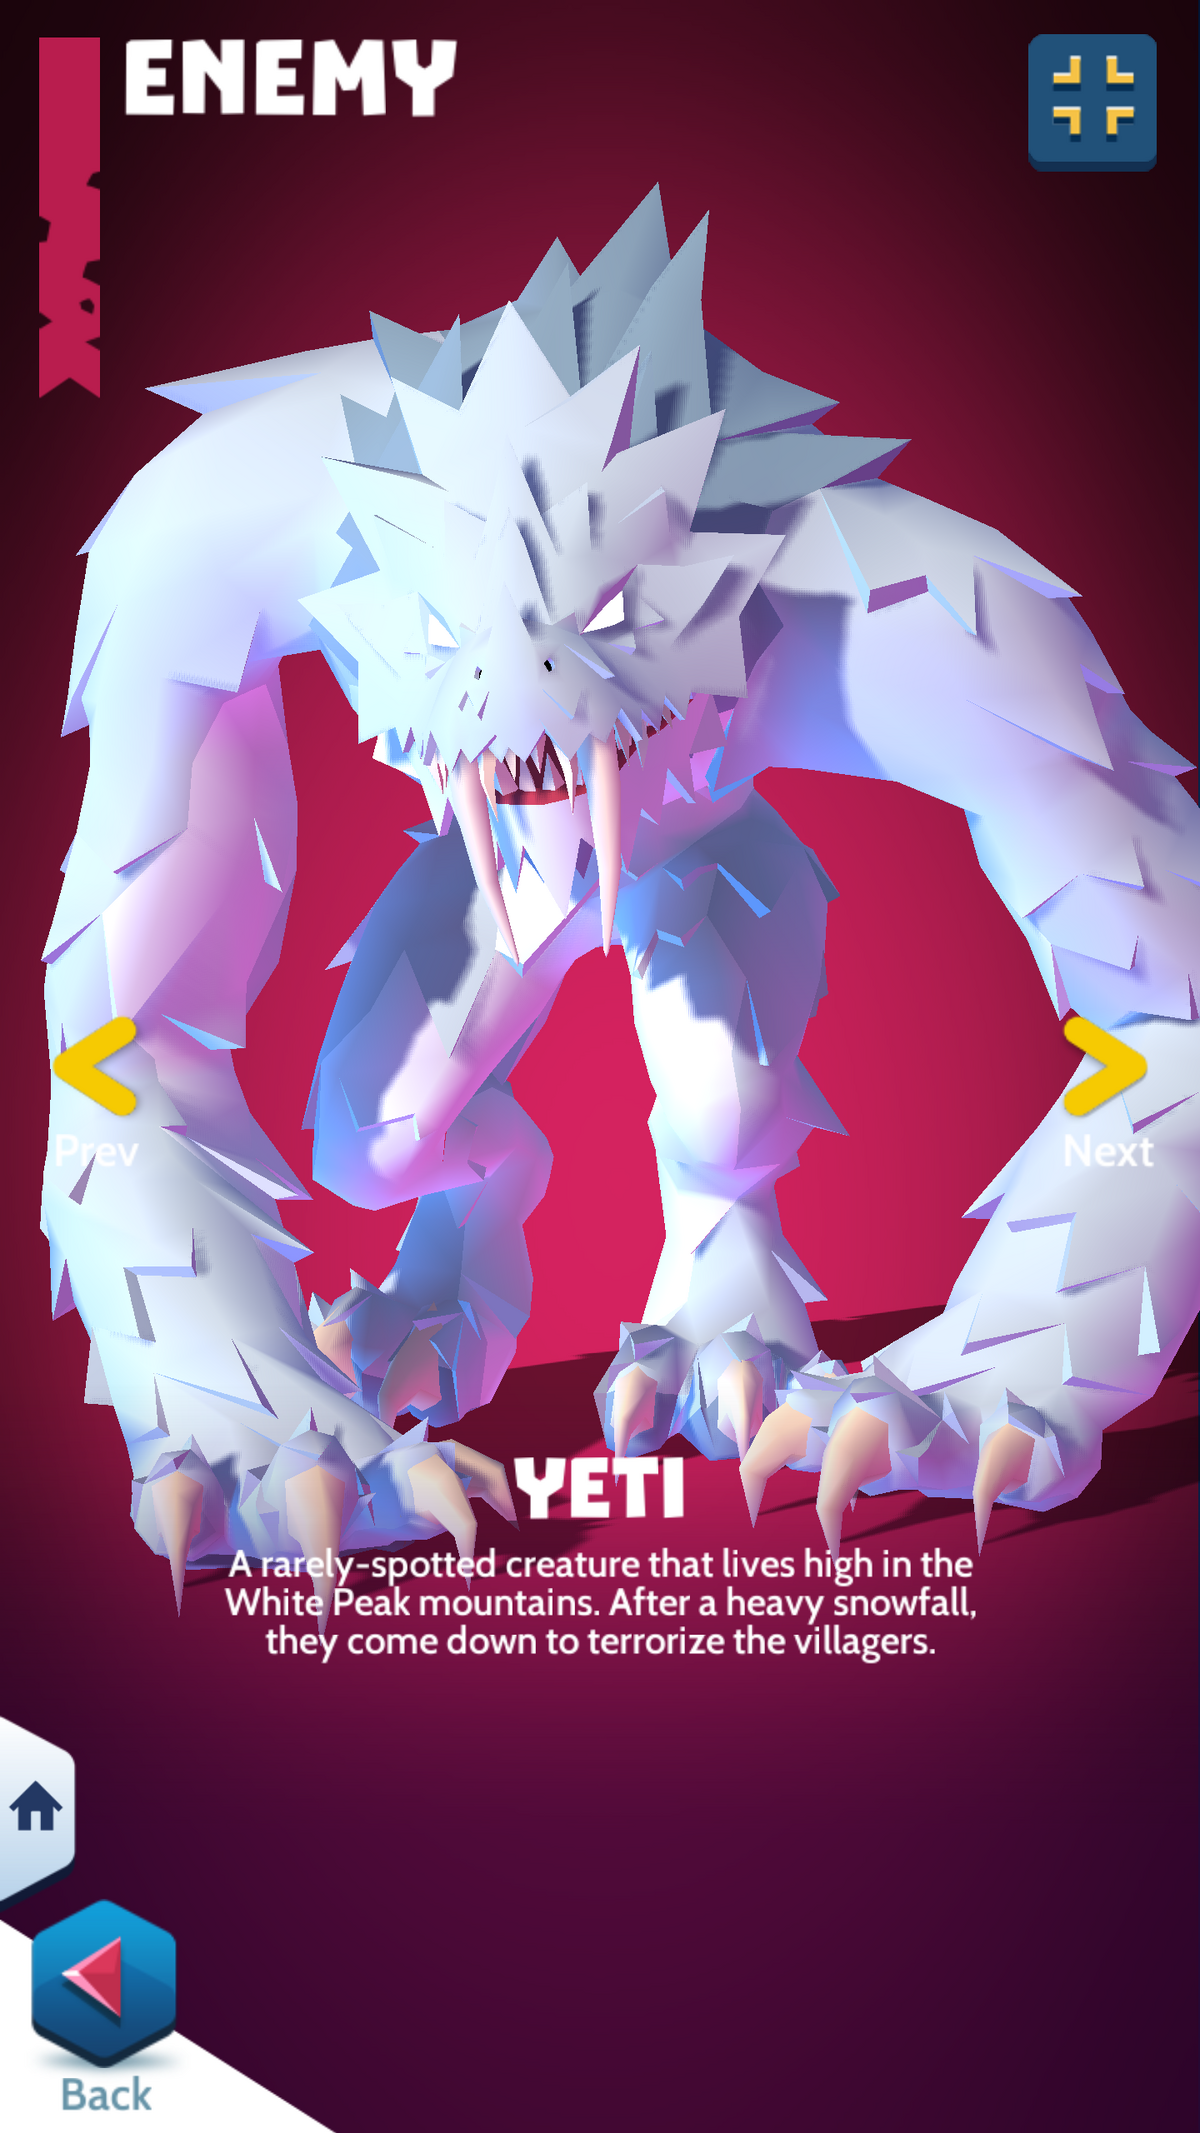 who has name for my yeti?? plz tell me some names in the next 2 hours and  tell me what font like ⓣⓗⓘⓢ τнis 🅣🅗🅘🅢 🅃🄷🄸🅂 ✩this✩ or ♡this♡ tell me  1